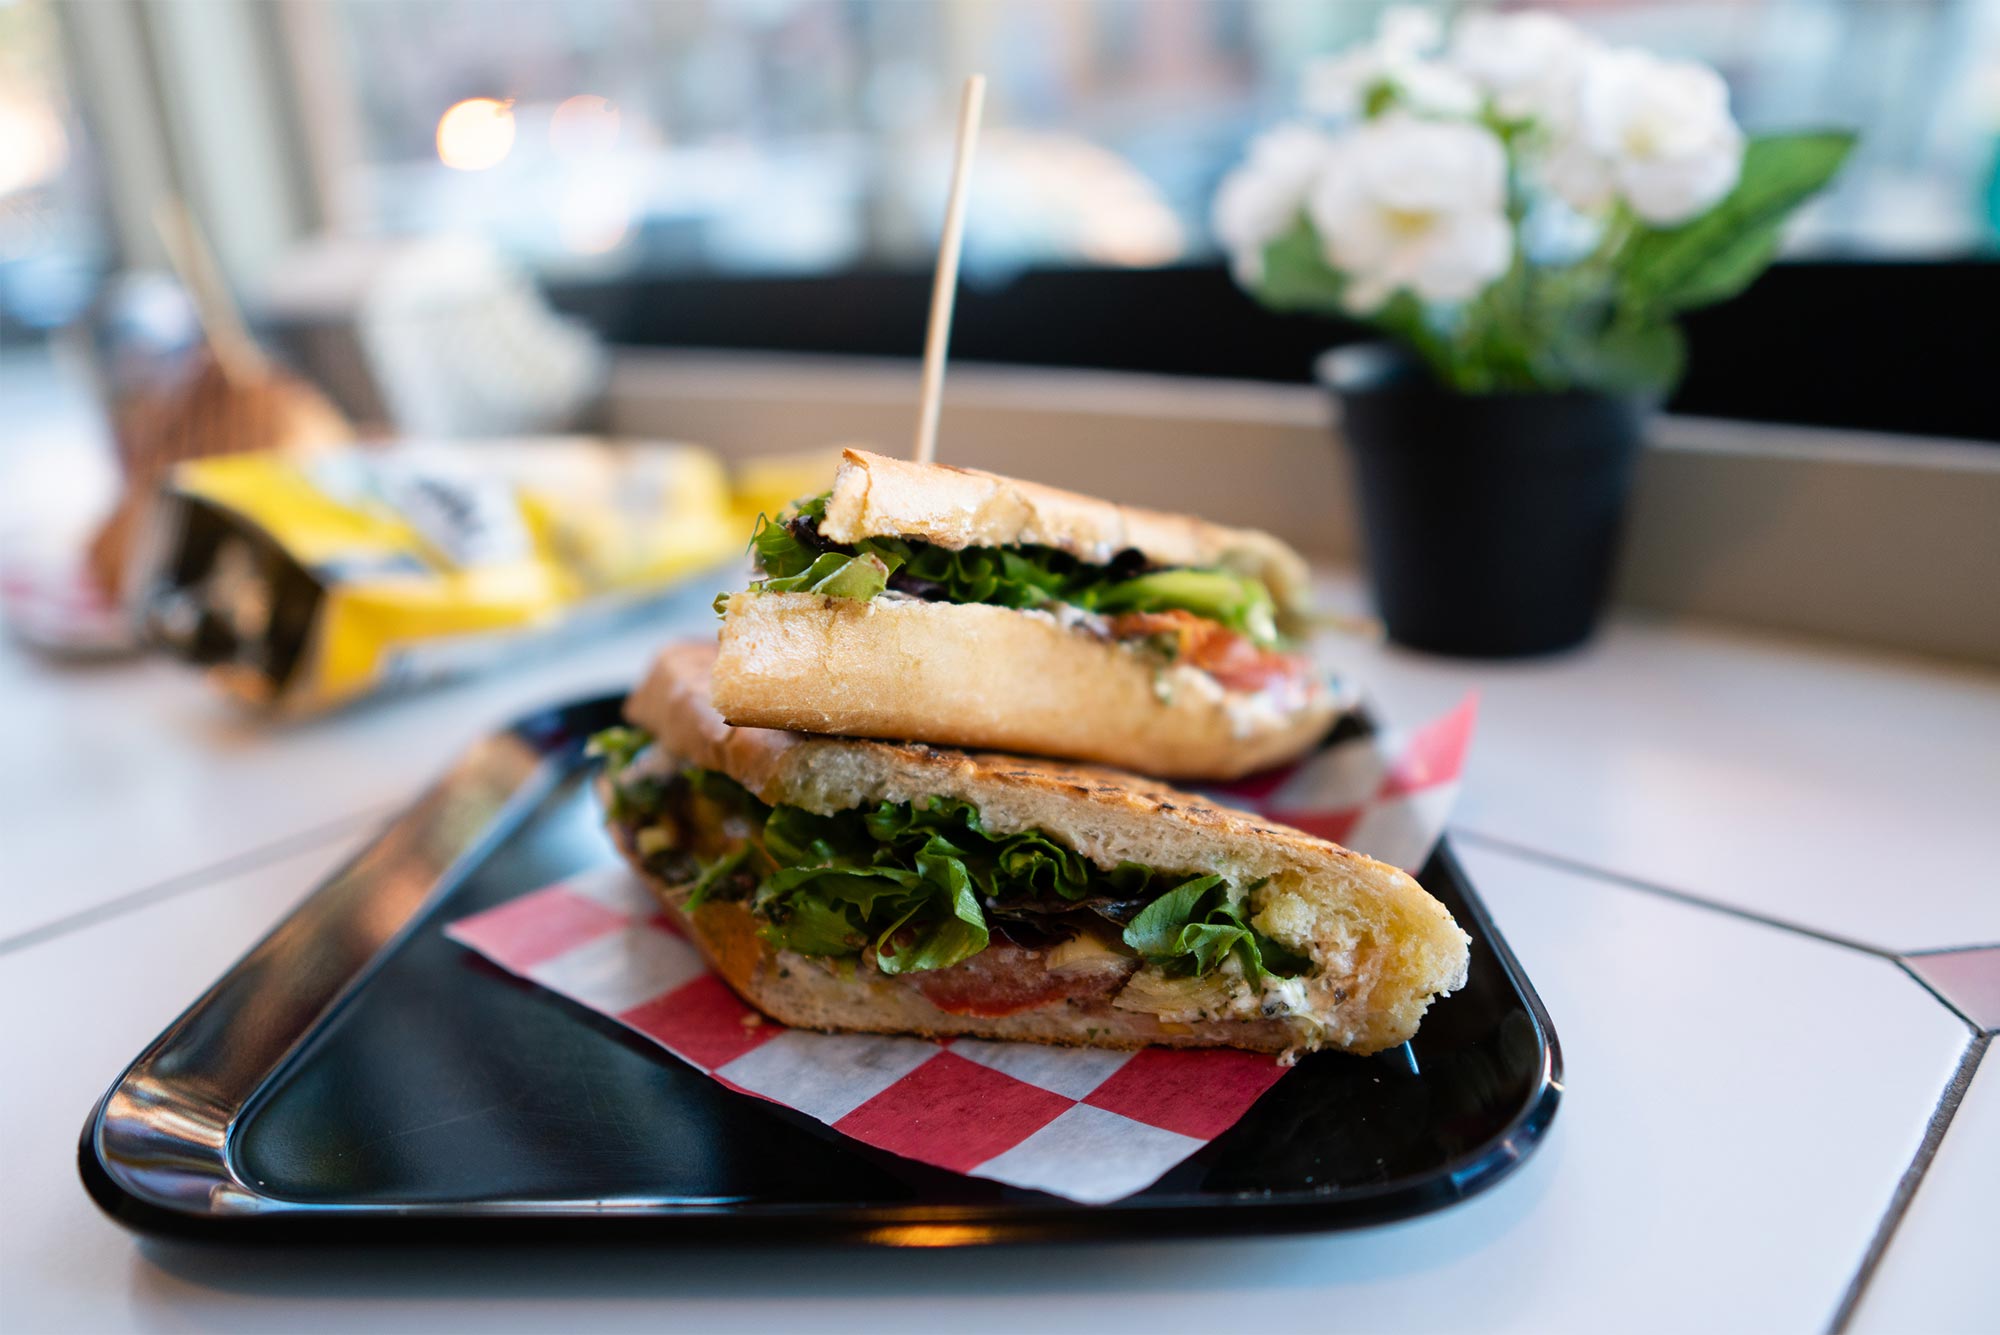 The Provencal sandwich at Blunch located at 59 East Springfield St. in Boston's South End neighborhood.